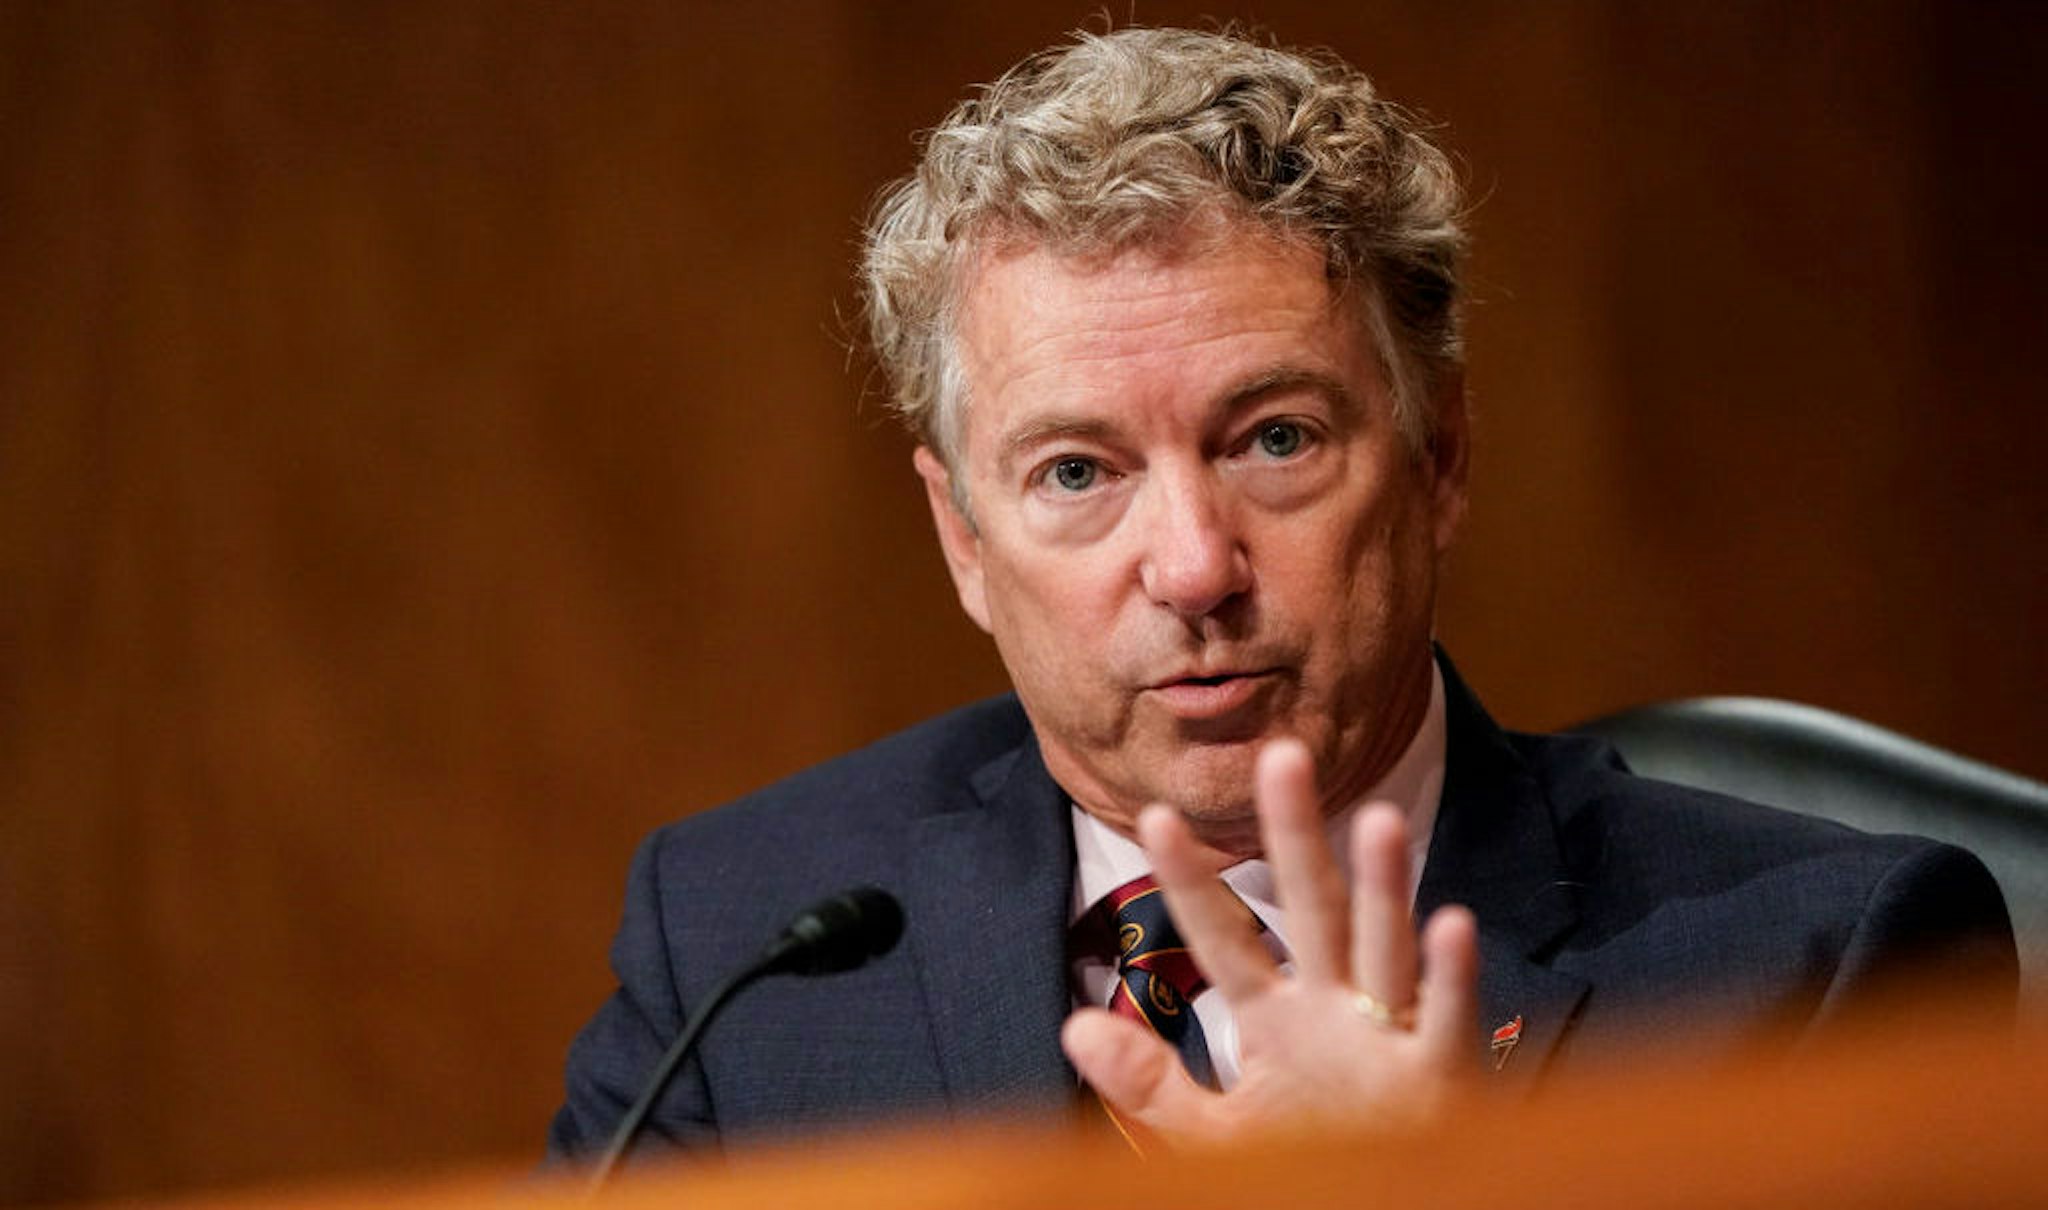 WASHINGTON, DC - SEPTEMBER 24: U.S. Sen. Rand Paul (R-KY) asks questions during a Senate Homeland Security and Governmental Affairs Committee hearing on "Threats to the Homeland" on Capitol Hill on September 24, 2020 in Washington, DC. (Photo by Joshua Roberts-Pool/Getty Images)